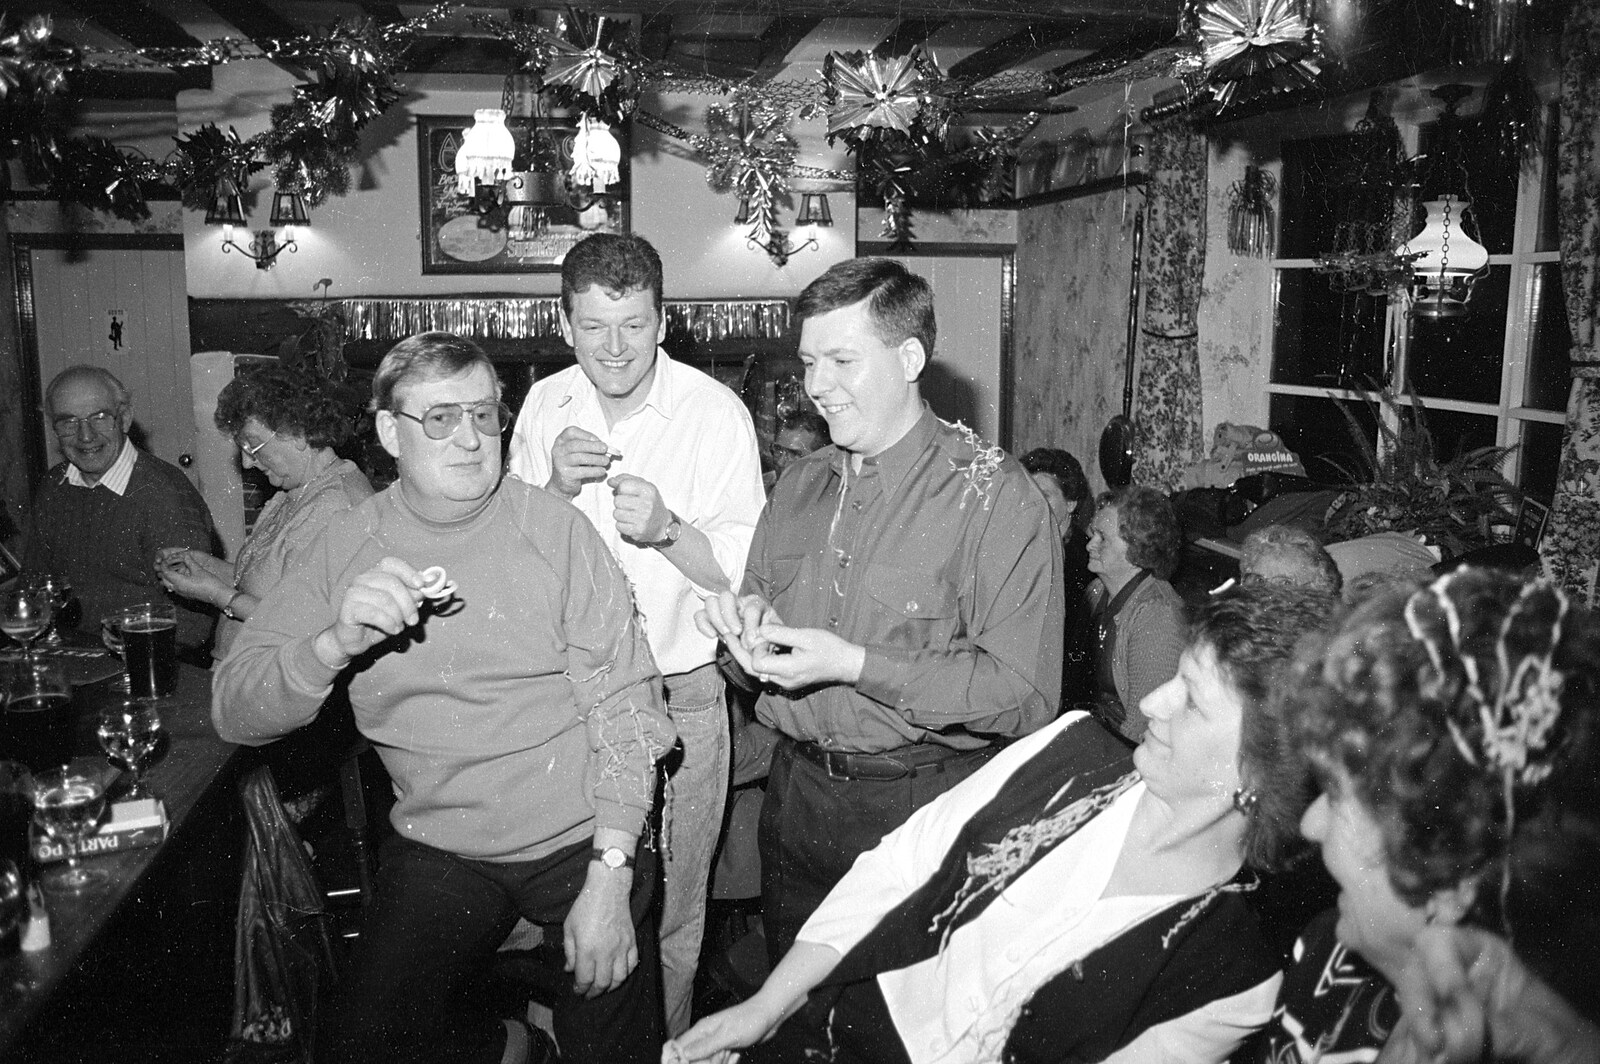 Tony, Trevor and Barry from New Year's Eve at the Swan Inn, Brome, Suffolk - 31st December 1992